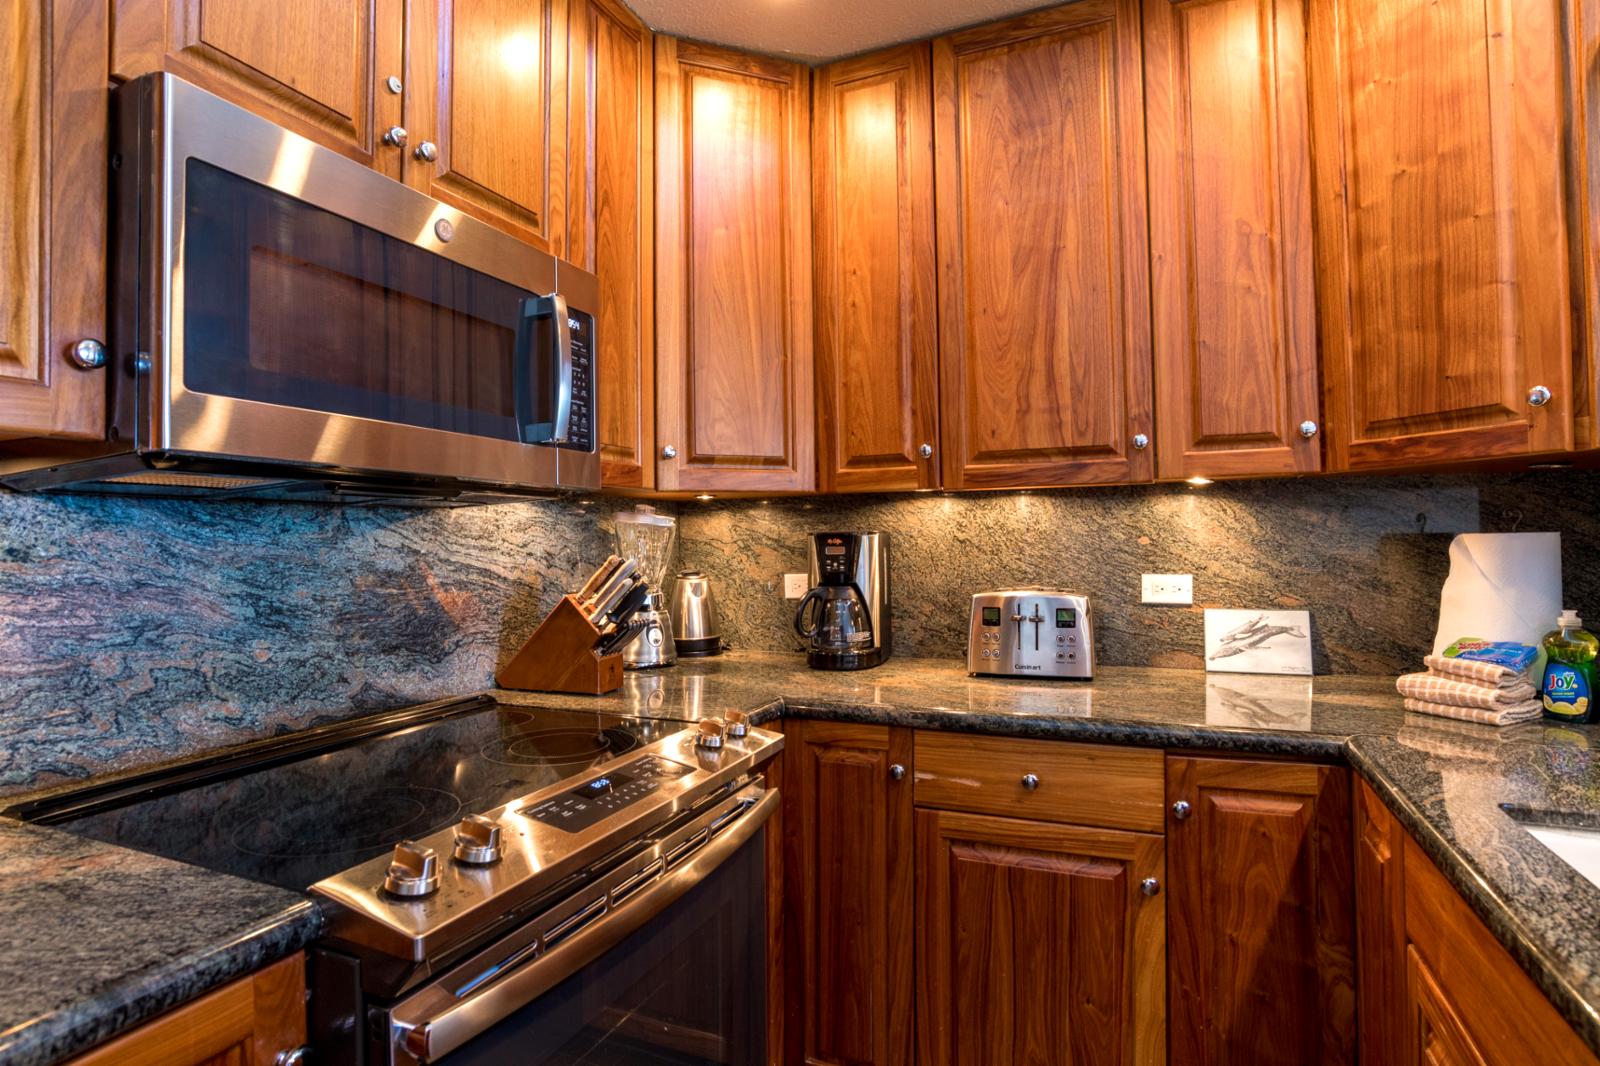 Ample storage, kitchen comes complete with cooking dishes or BBQ needs!